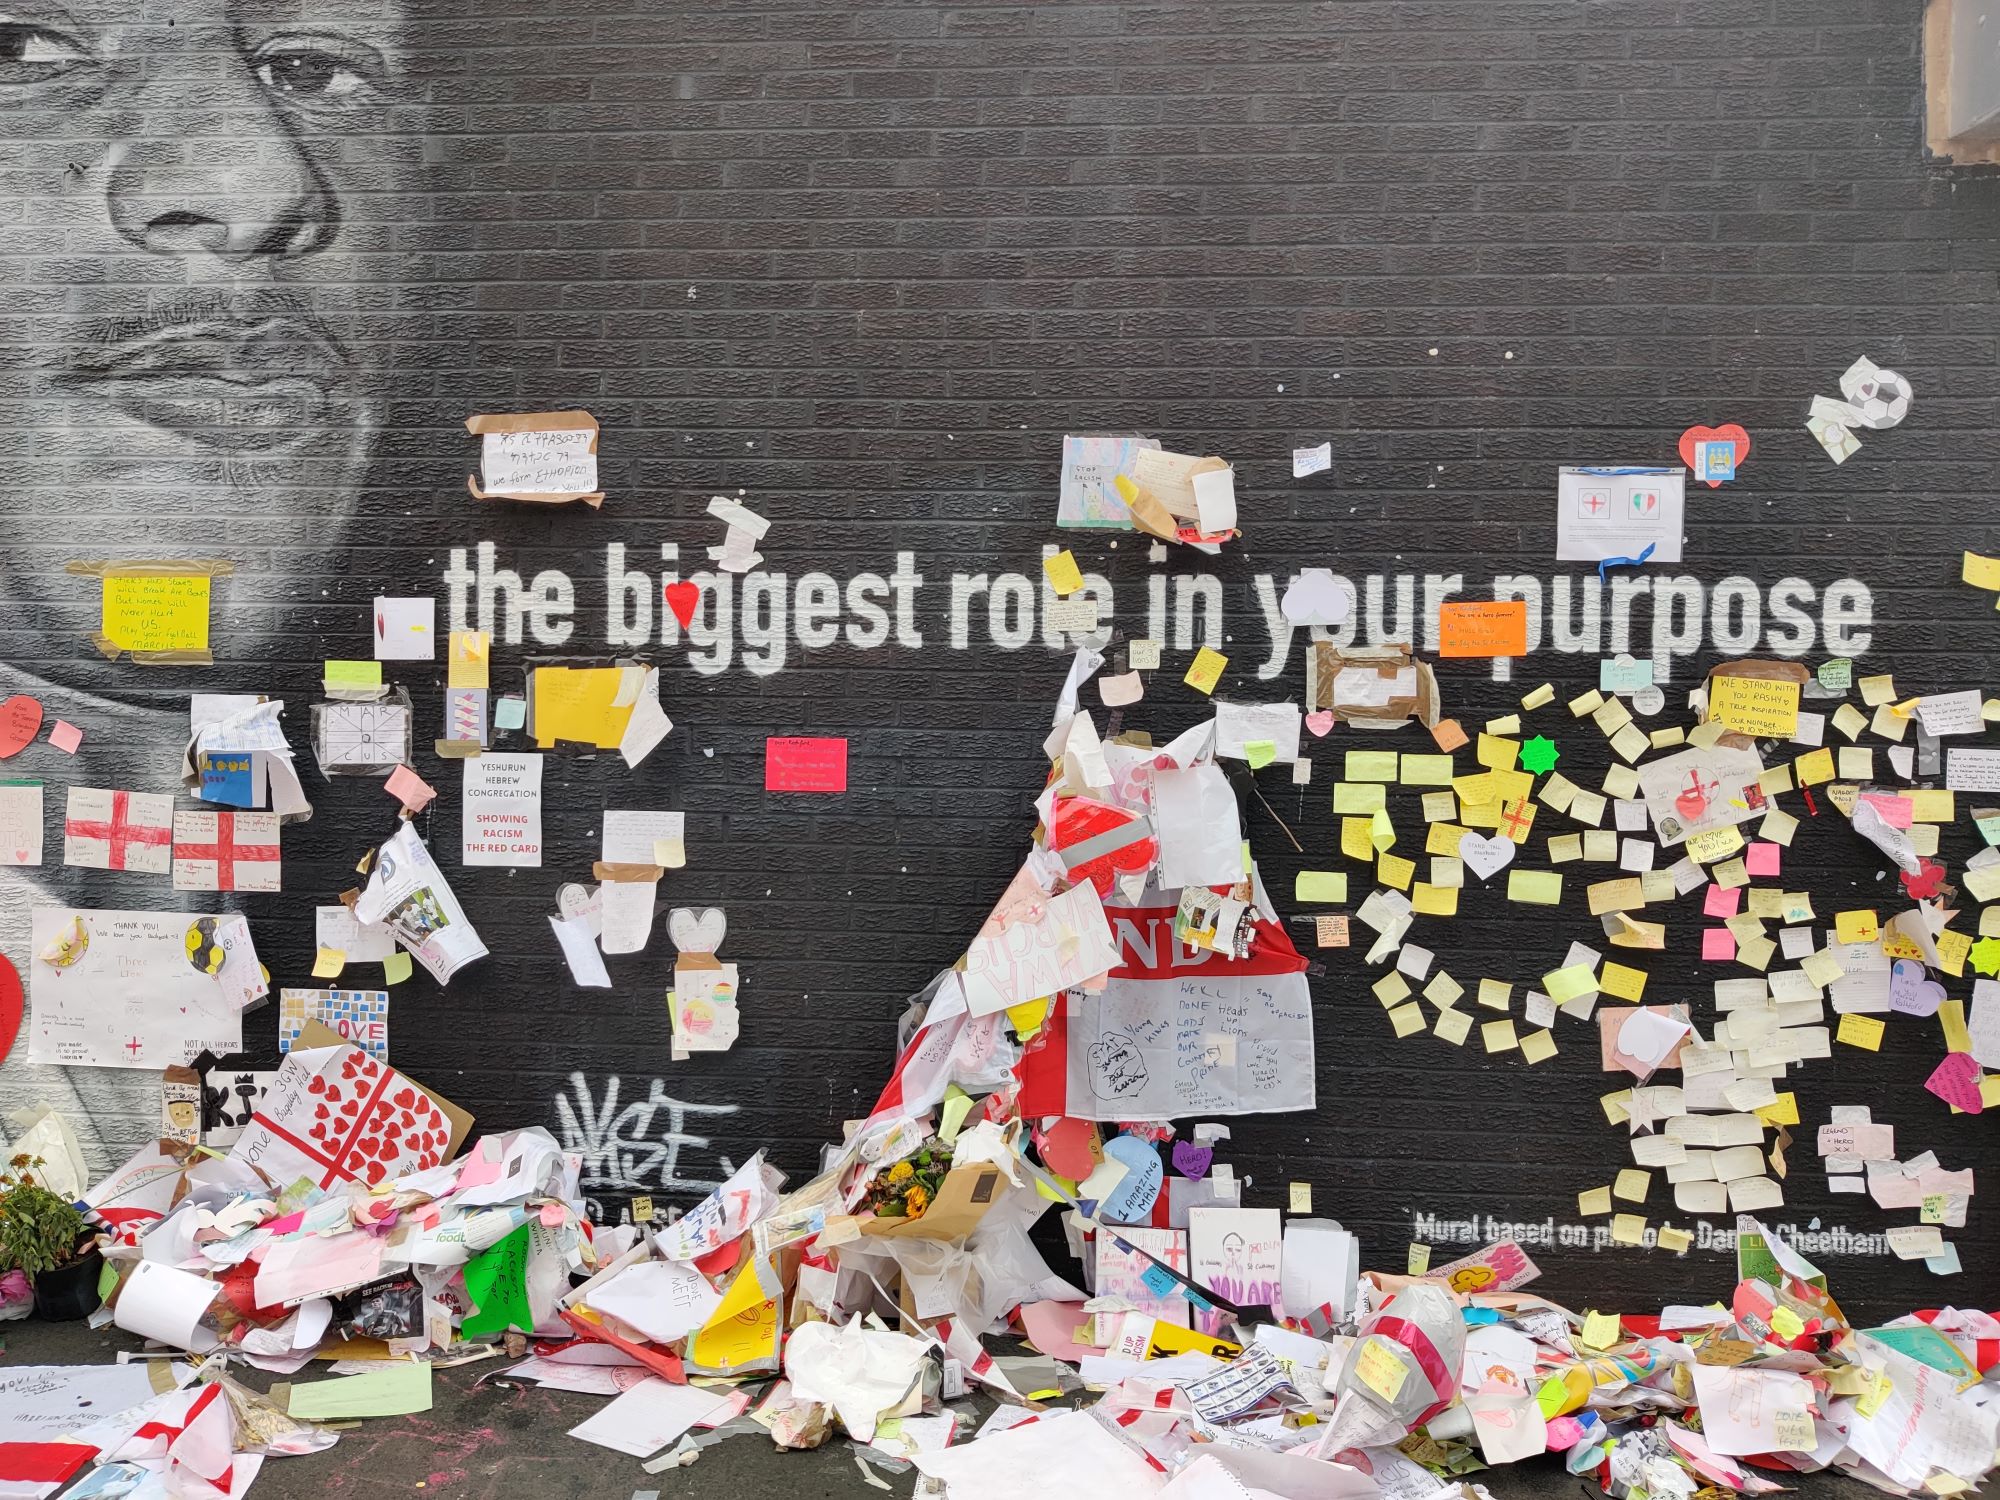 A mural of Marcus Rashford covered in notes and tributes